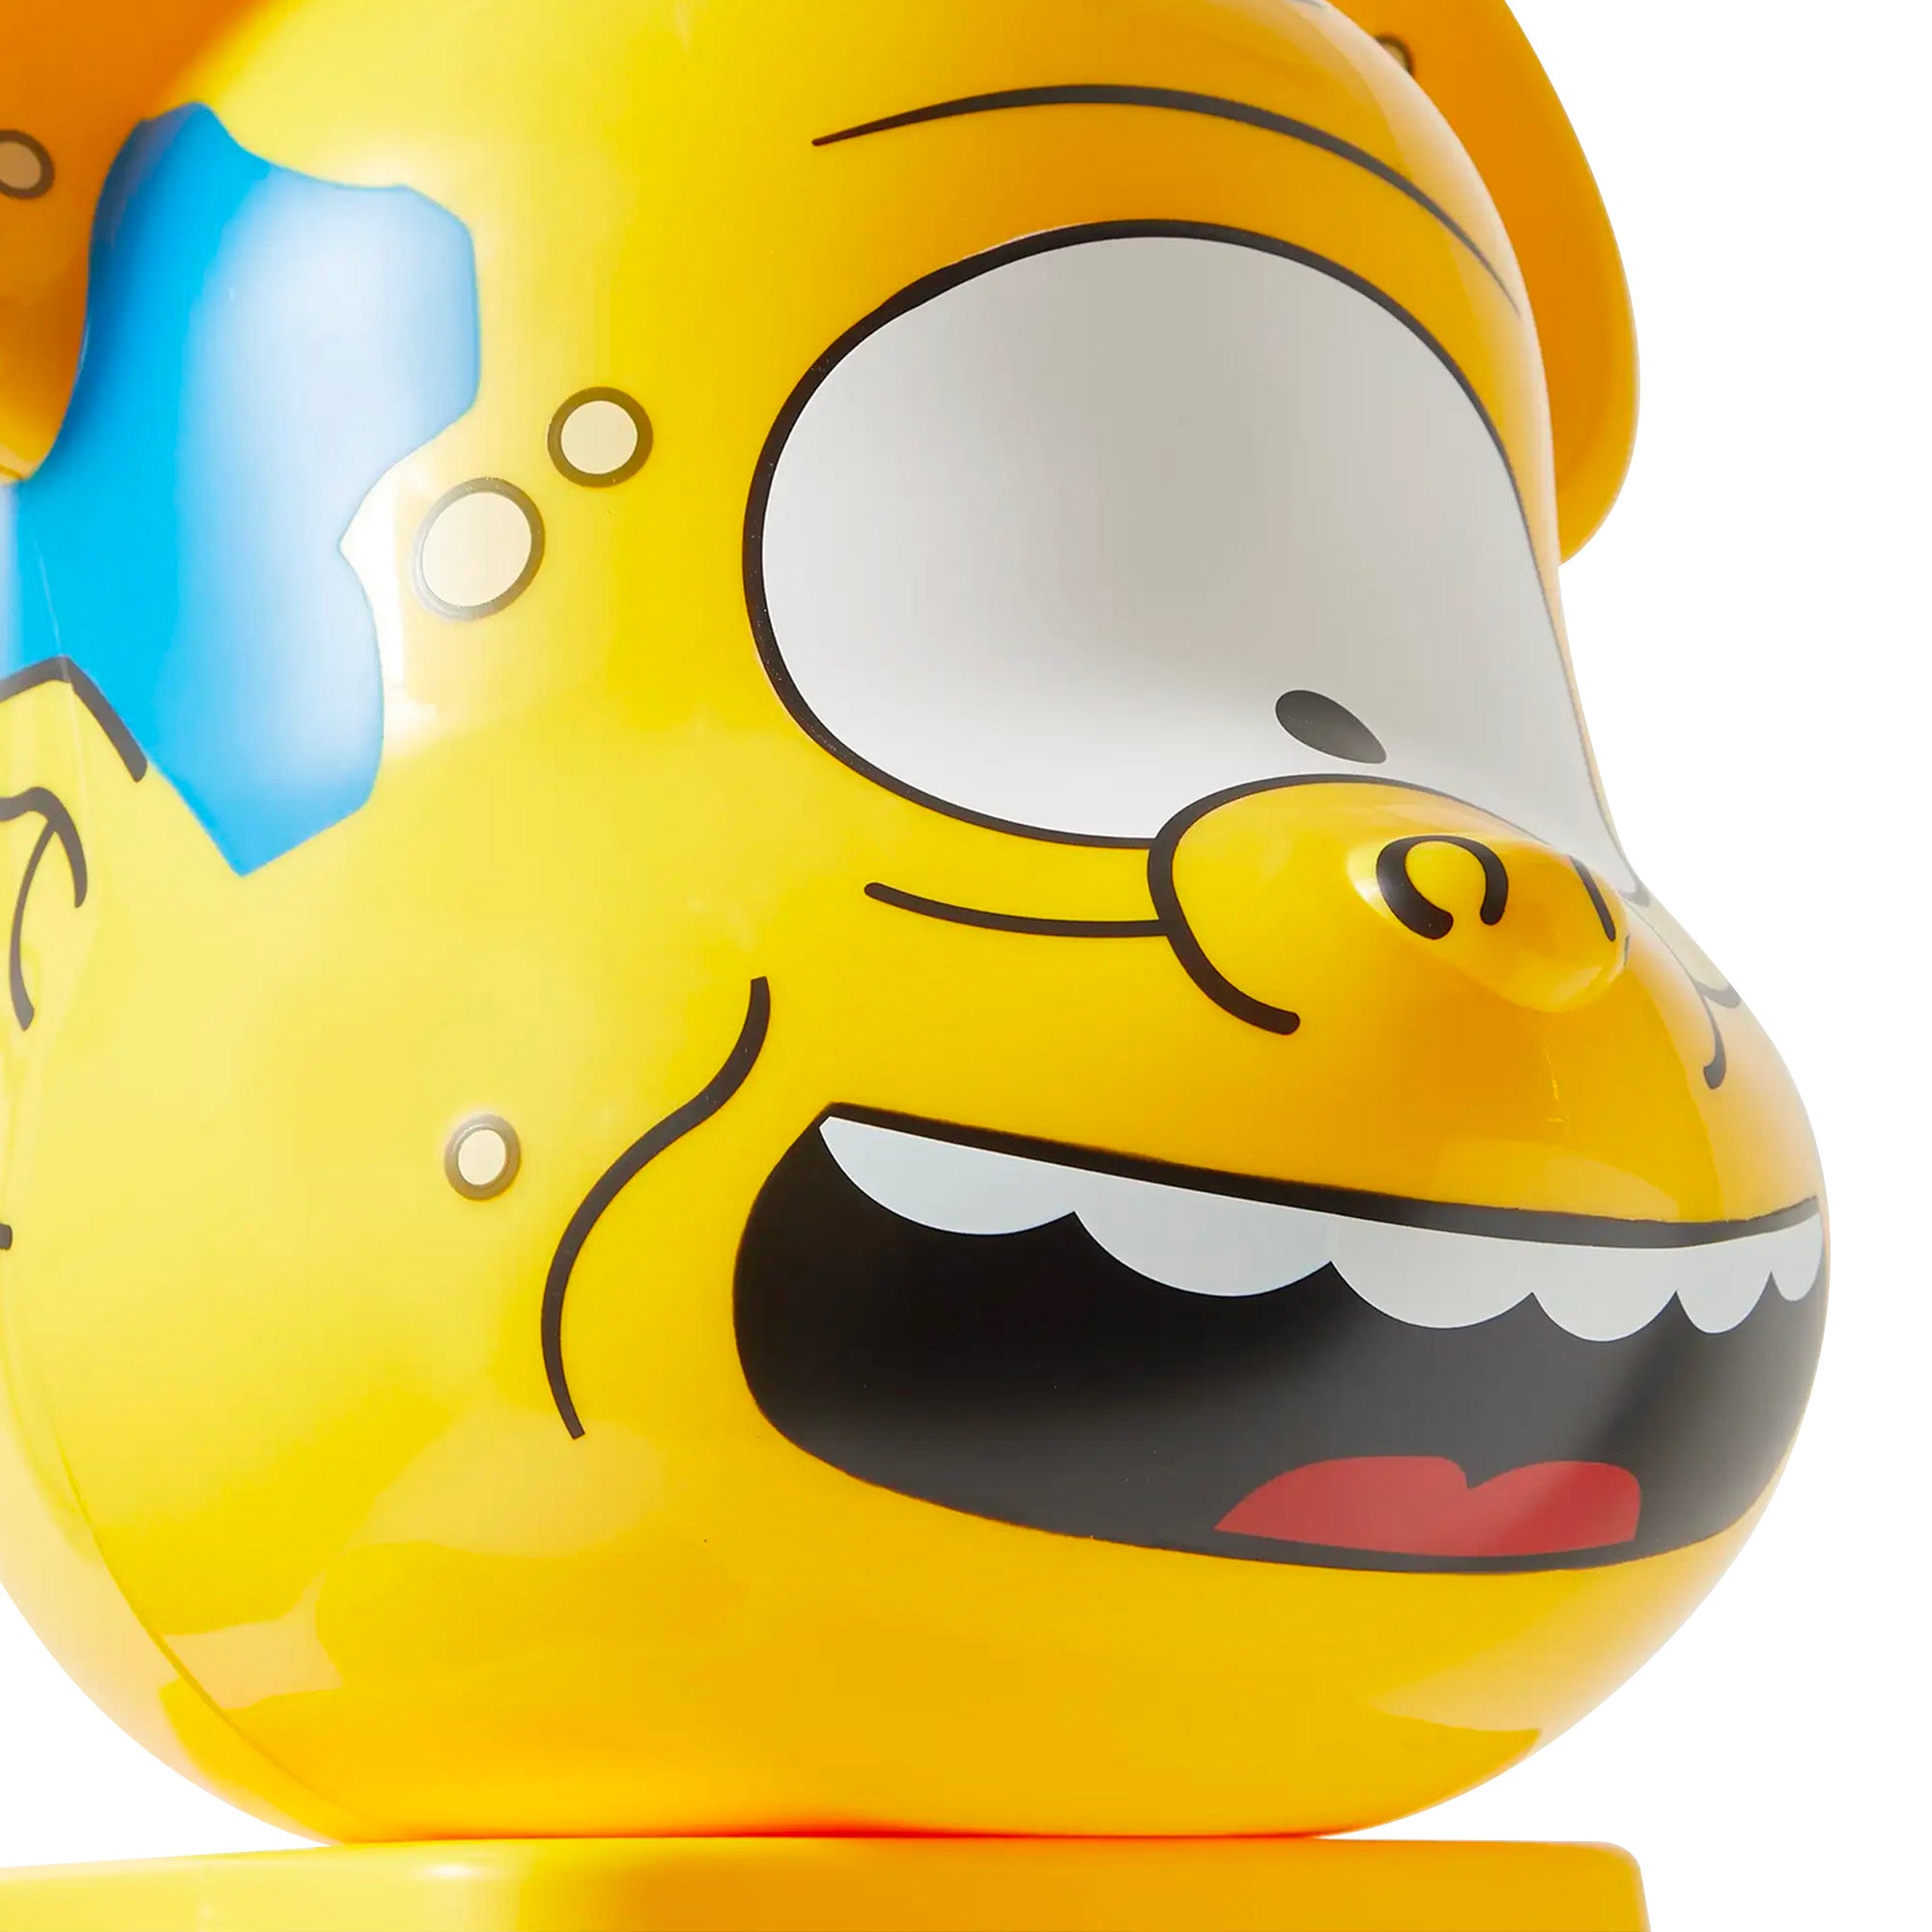 MEDICOM TOY: BE@RBRICK - The Simpsons Cyclops 1000% – TOY TOKYO